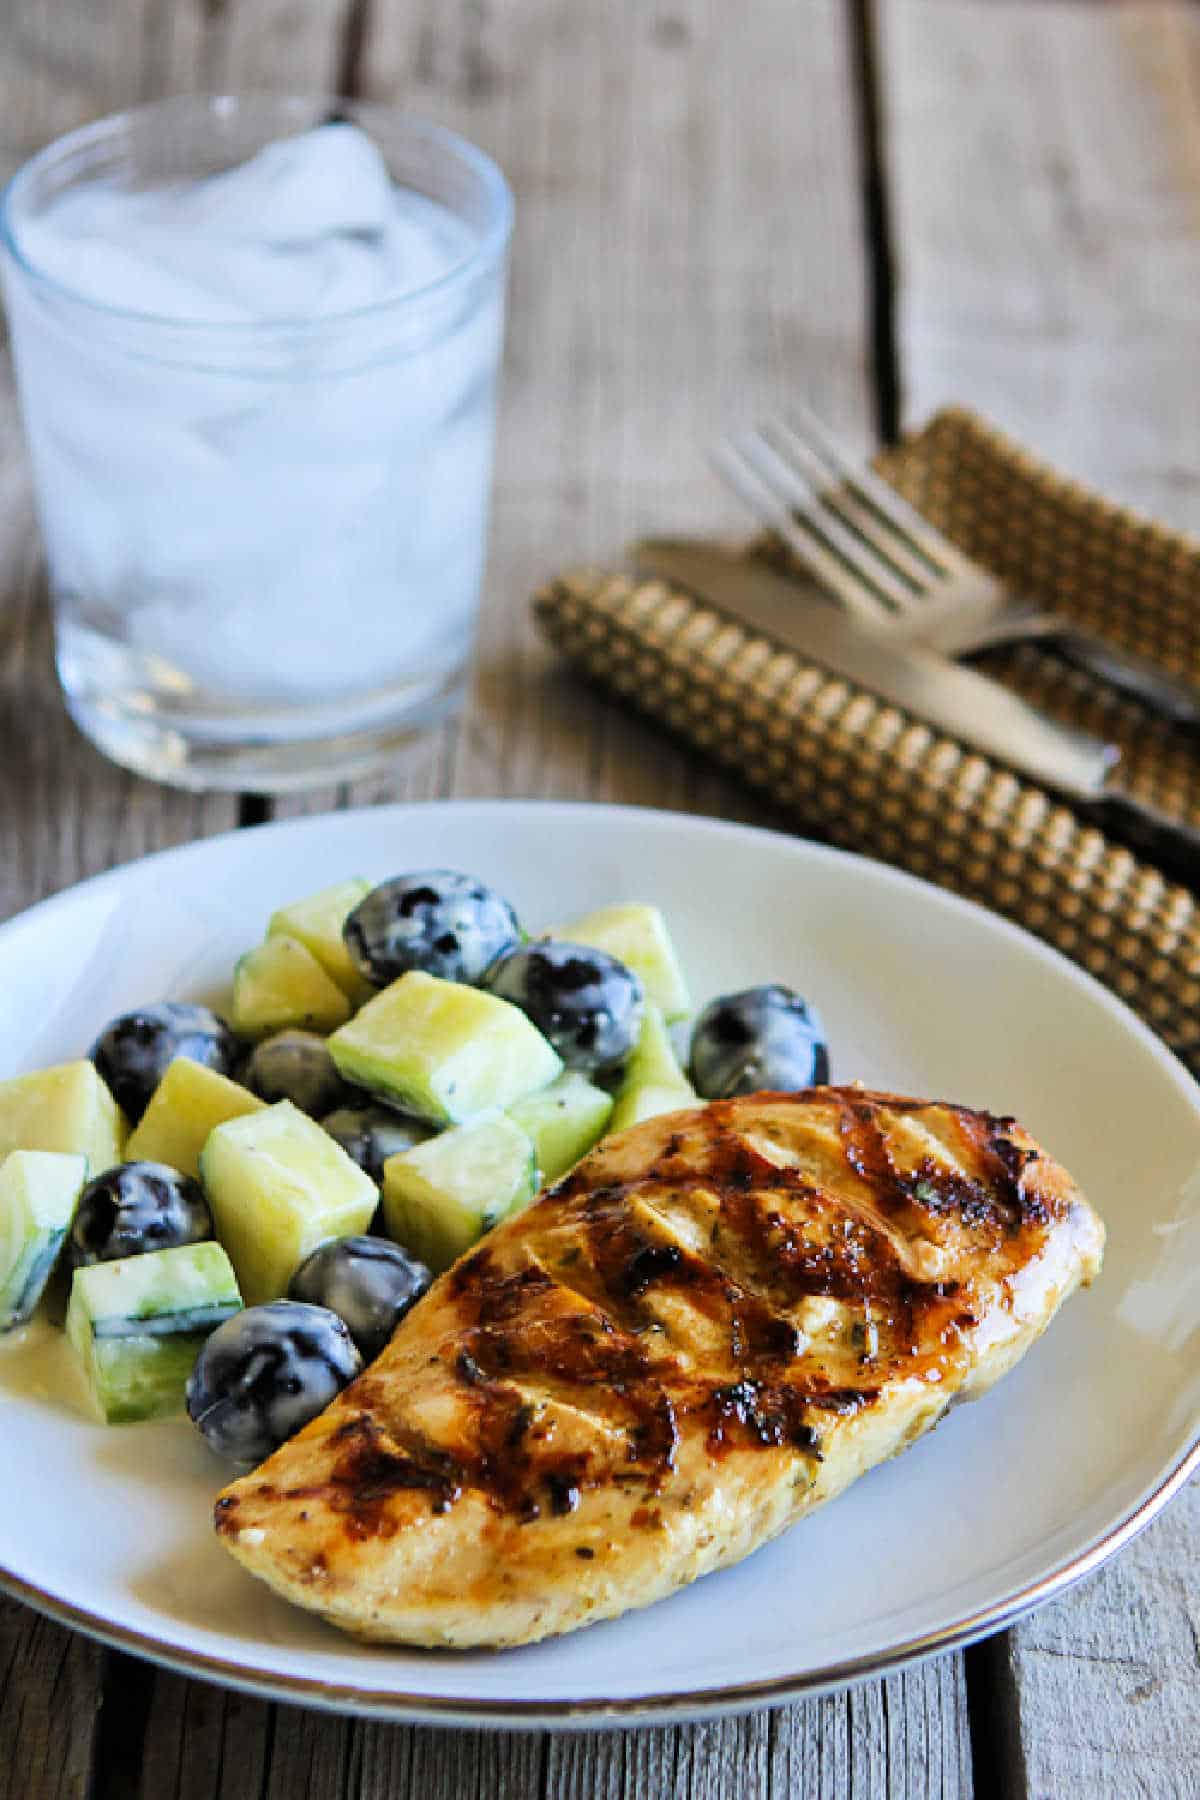 Grilled Chicken with Lemon and Capers shown on serving plate with cucumber and olive salad